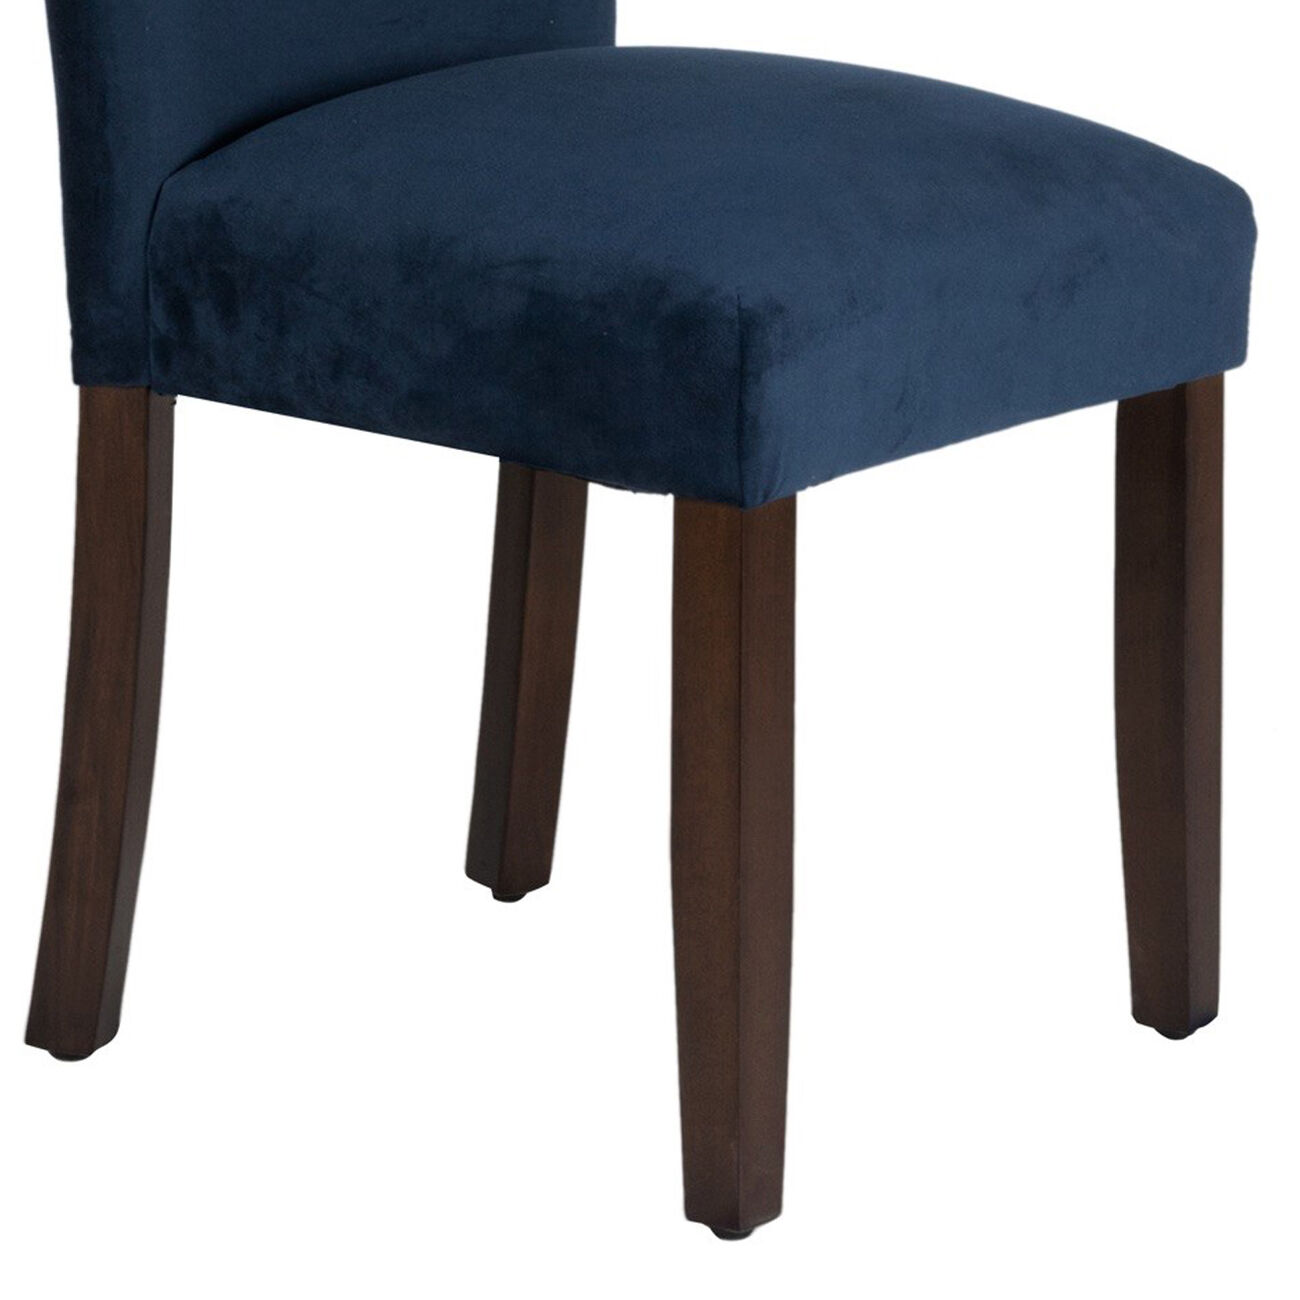 Velvet Upholstered Parsons Dining Chair with Wooden Legs, Navy Blue and Brown, Set of Two